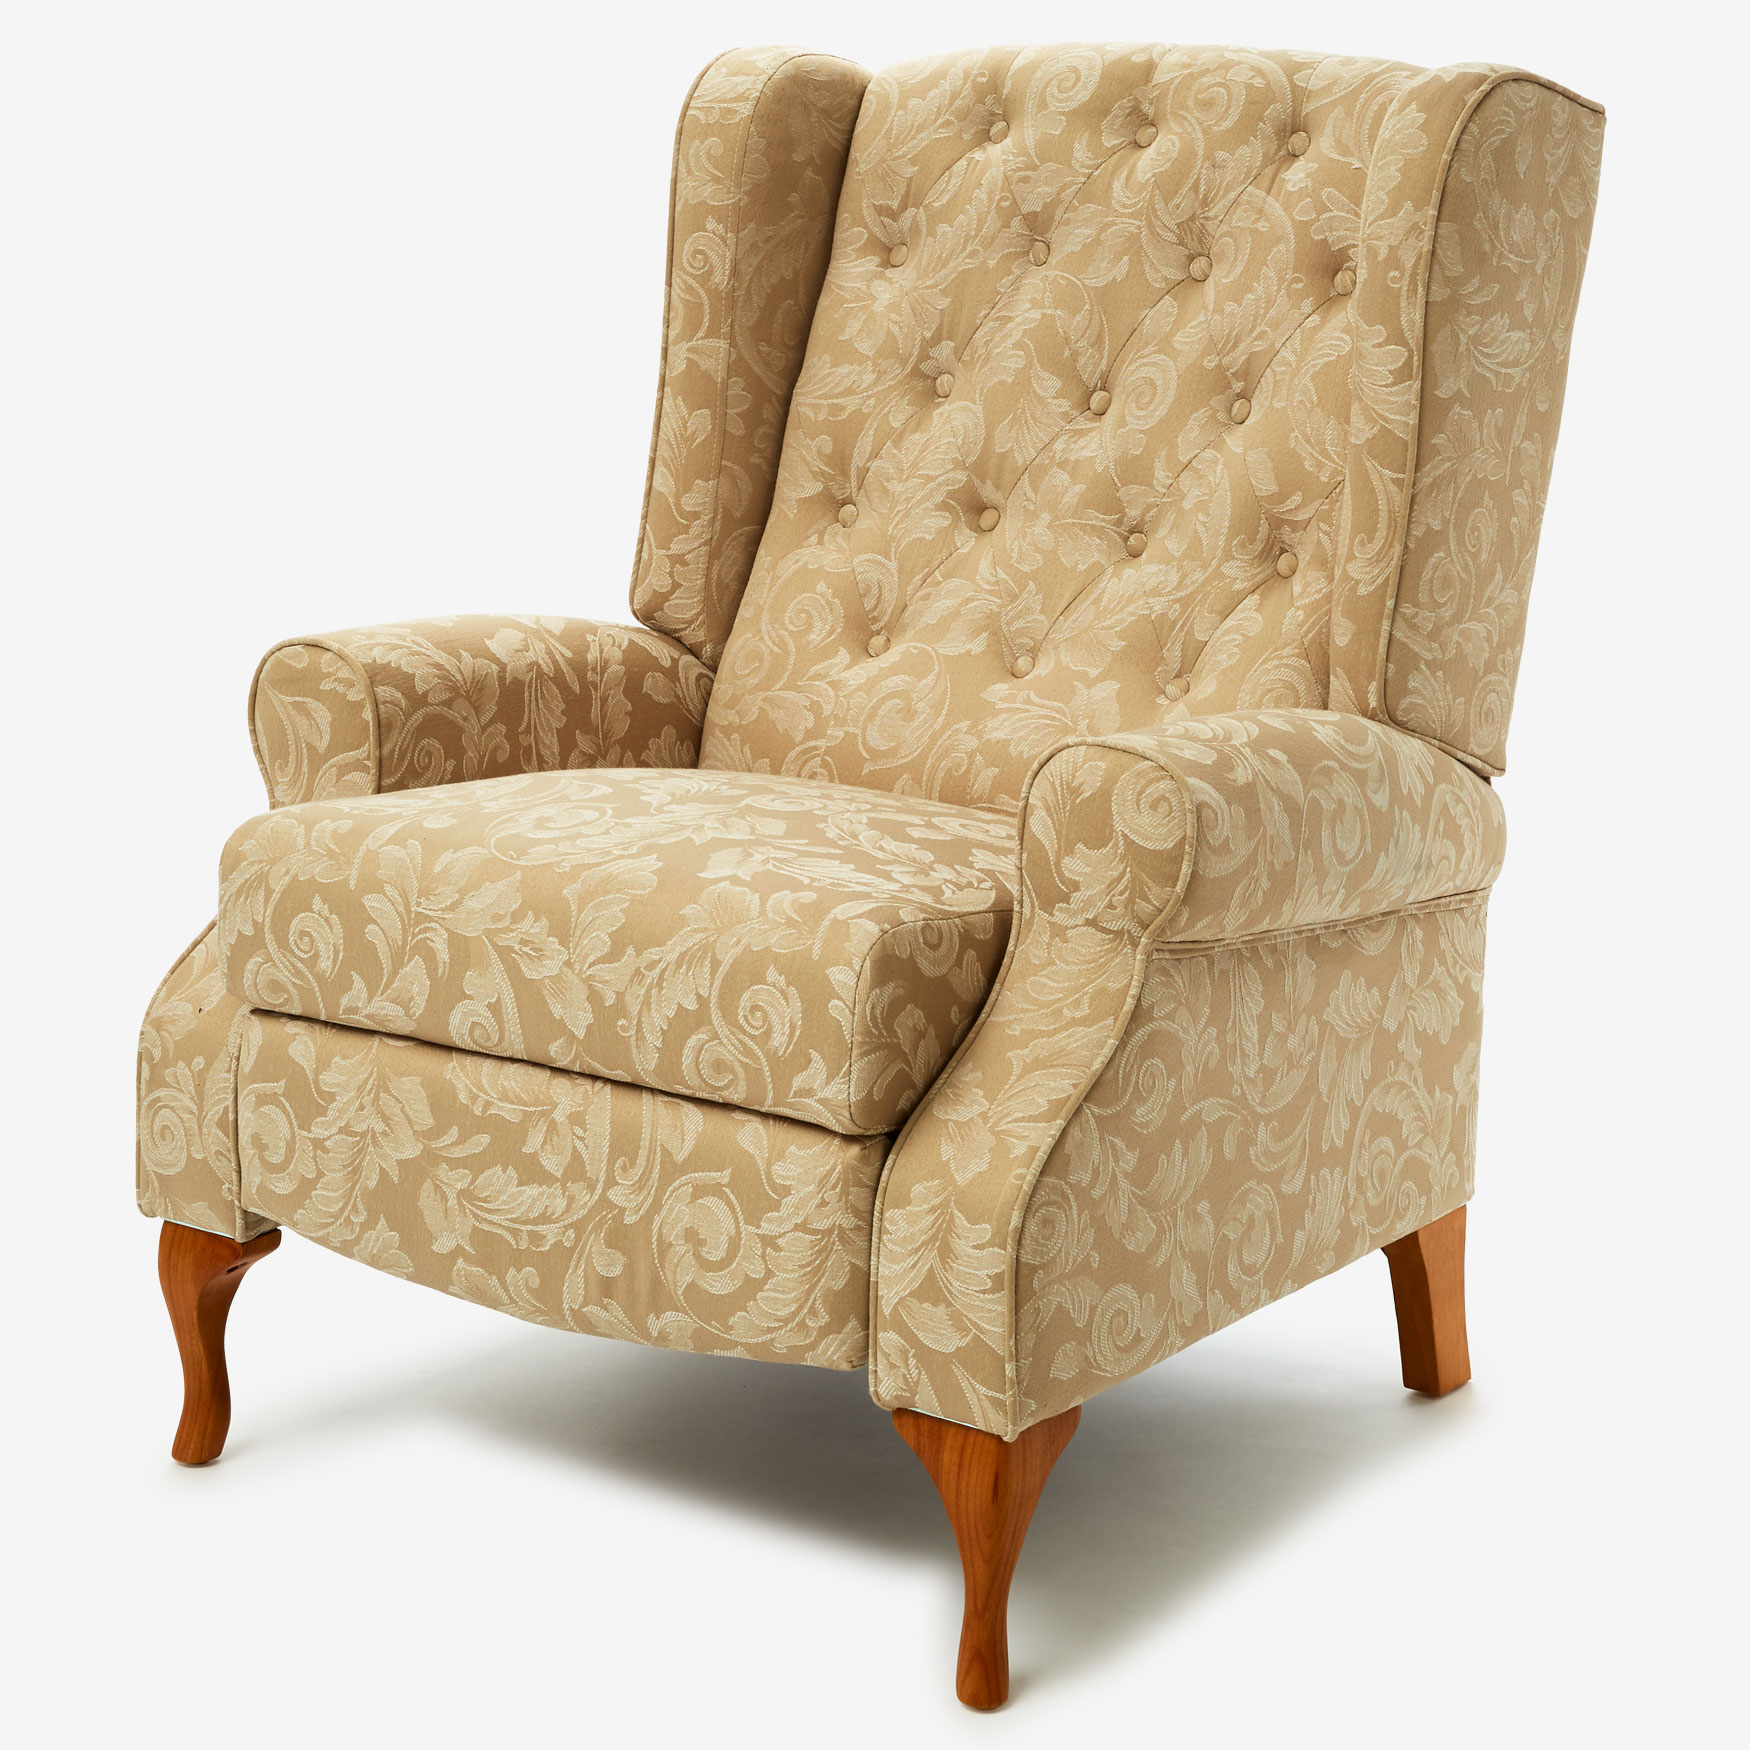 Queen Anne Style Tufted Wingback Recliner| Chairs & Recliners | Brylane